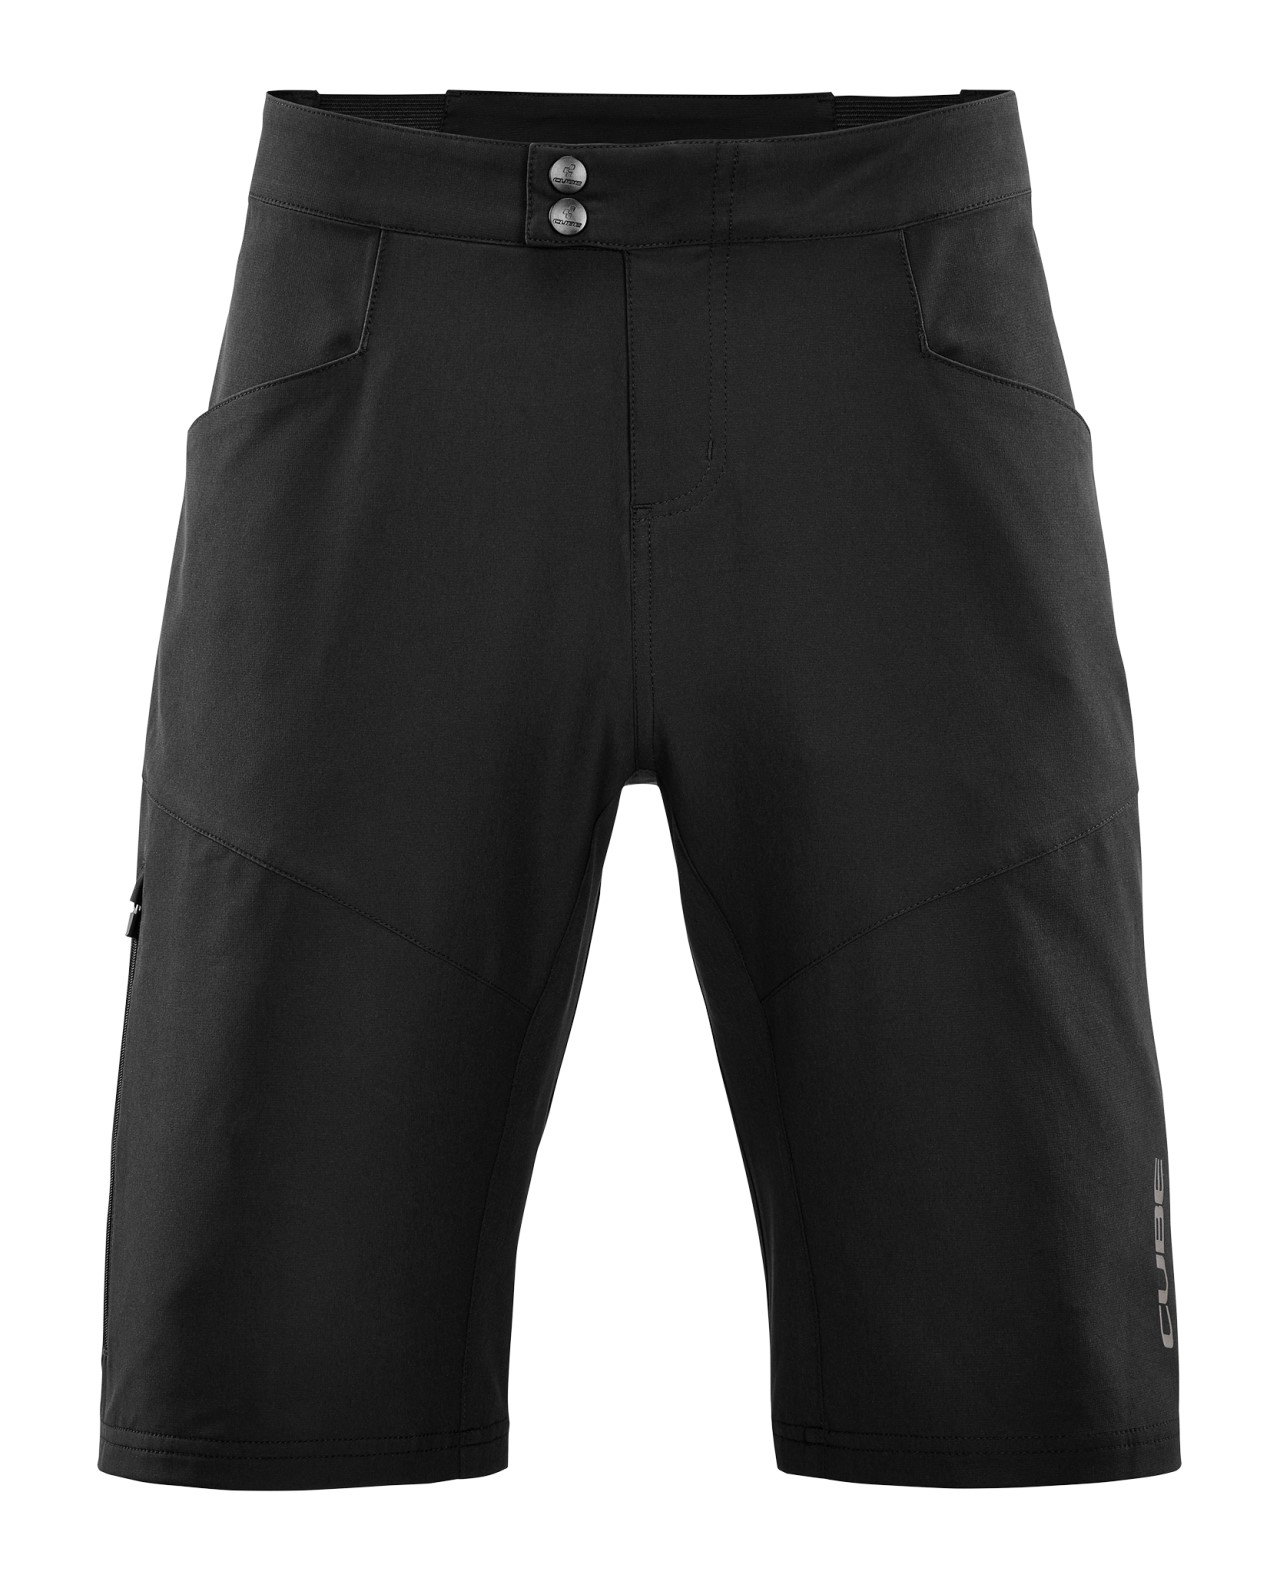 Cube ATX Baggy Shorts CMPT + Liner Shorts Velikost: S